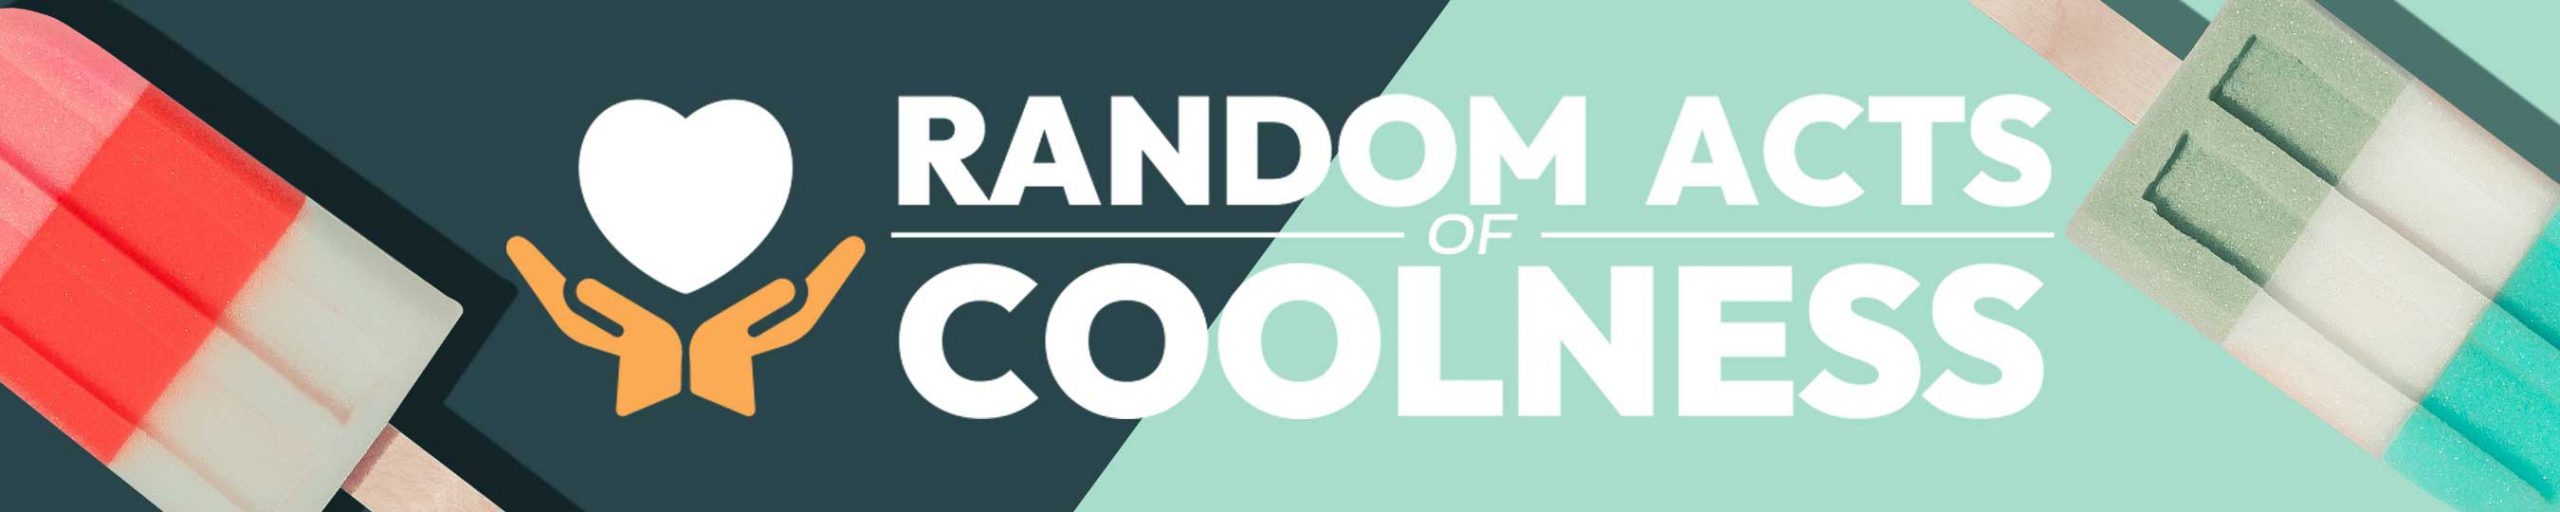 Random Acts of Coolness